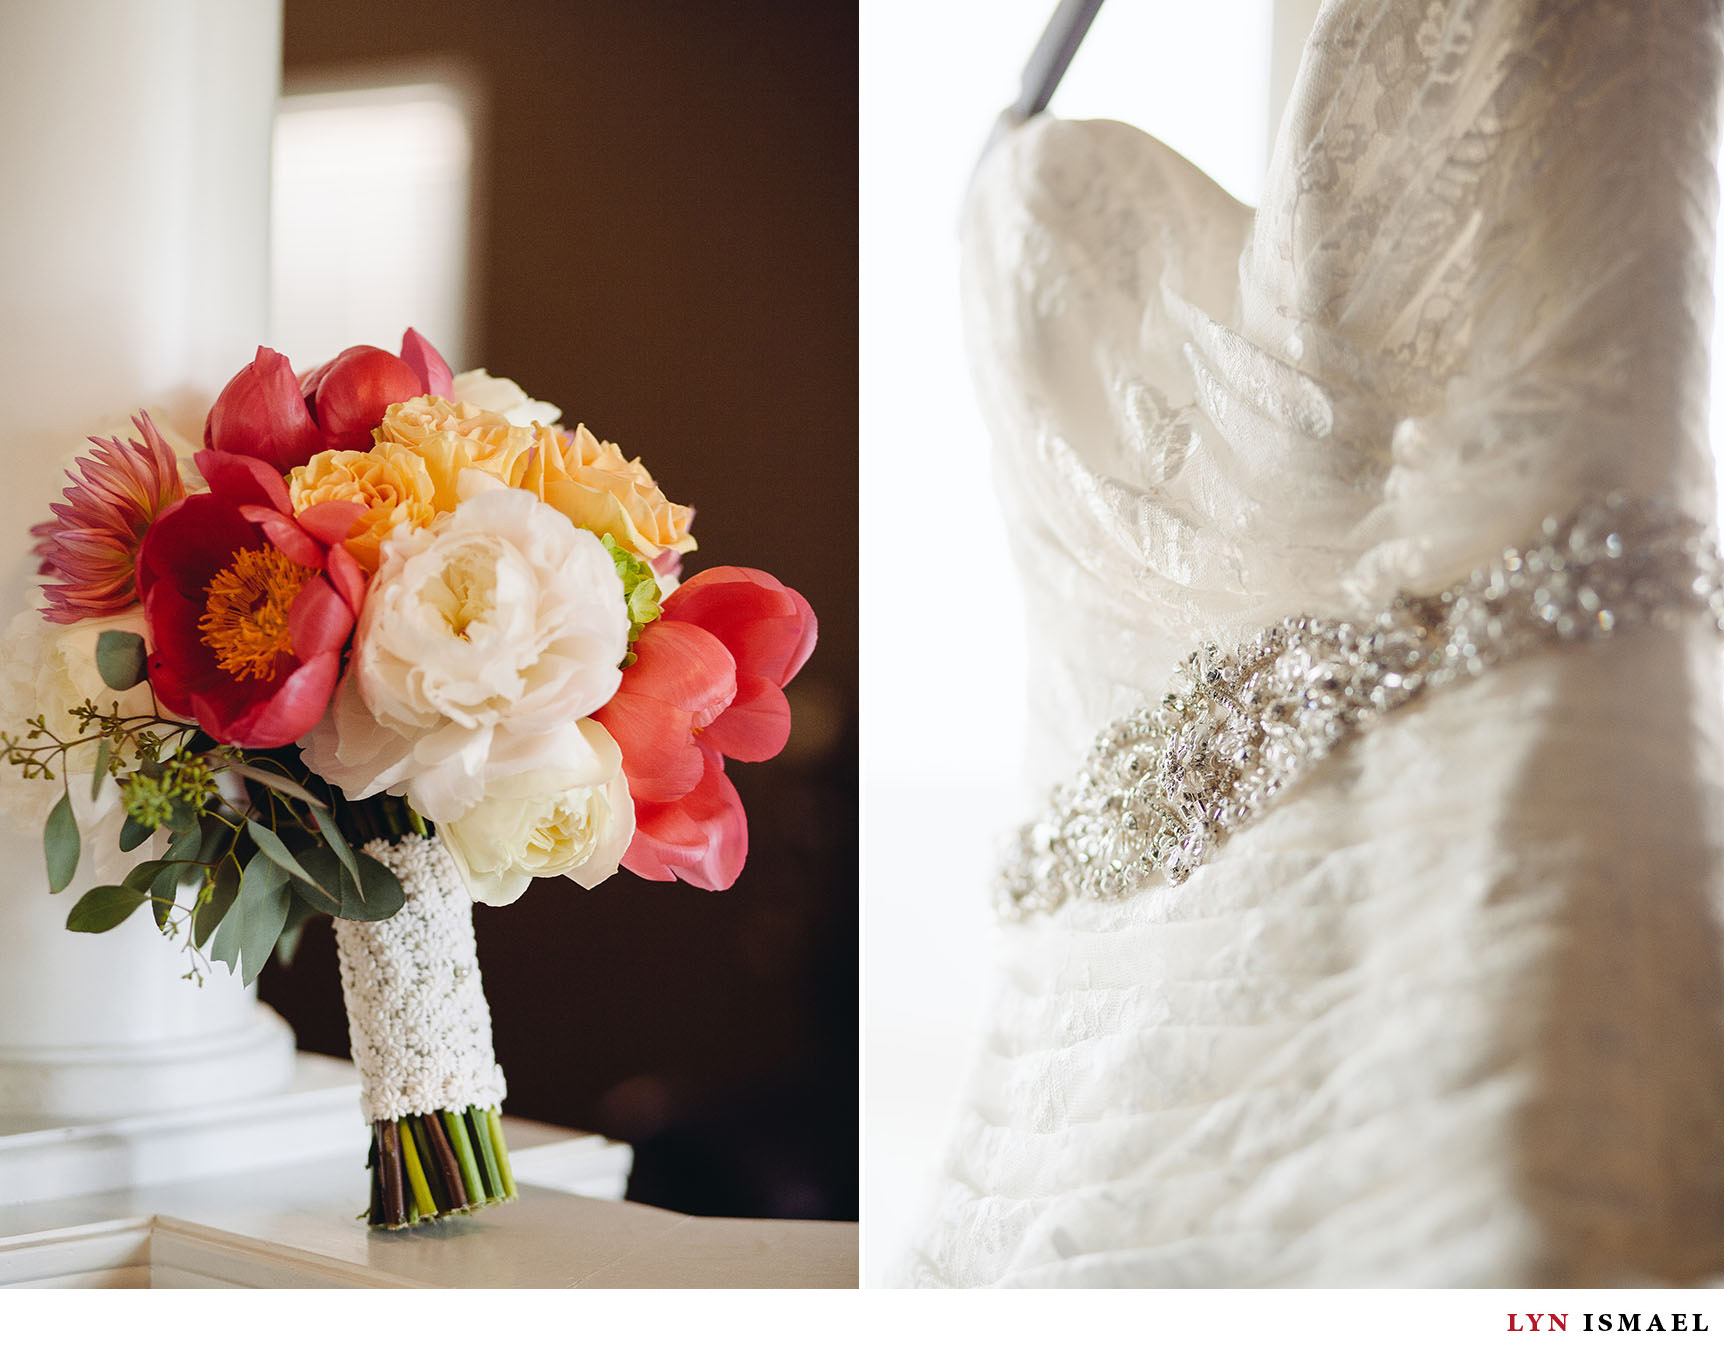 Flowers from Le Fleur and gown from Taylor's Bridal Gown Shoppe